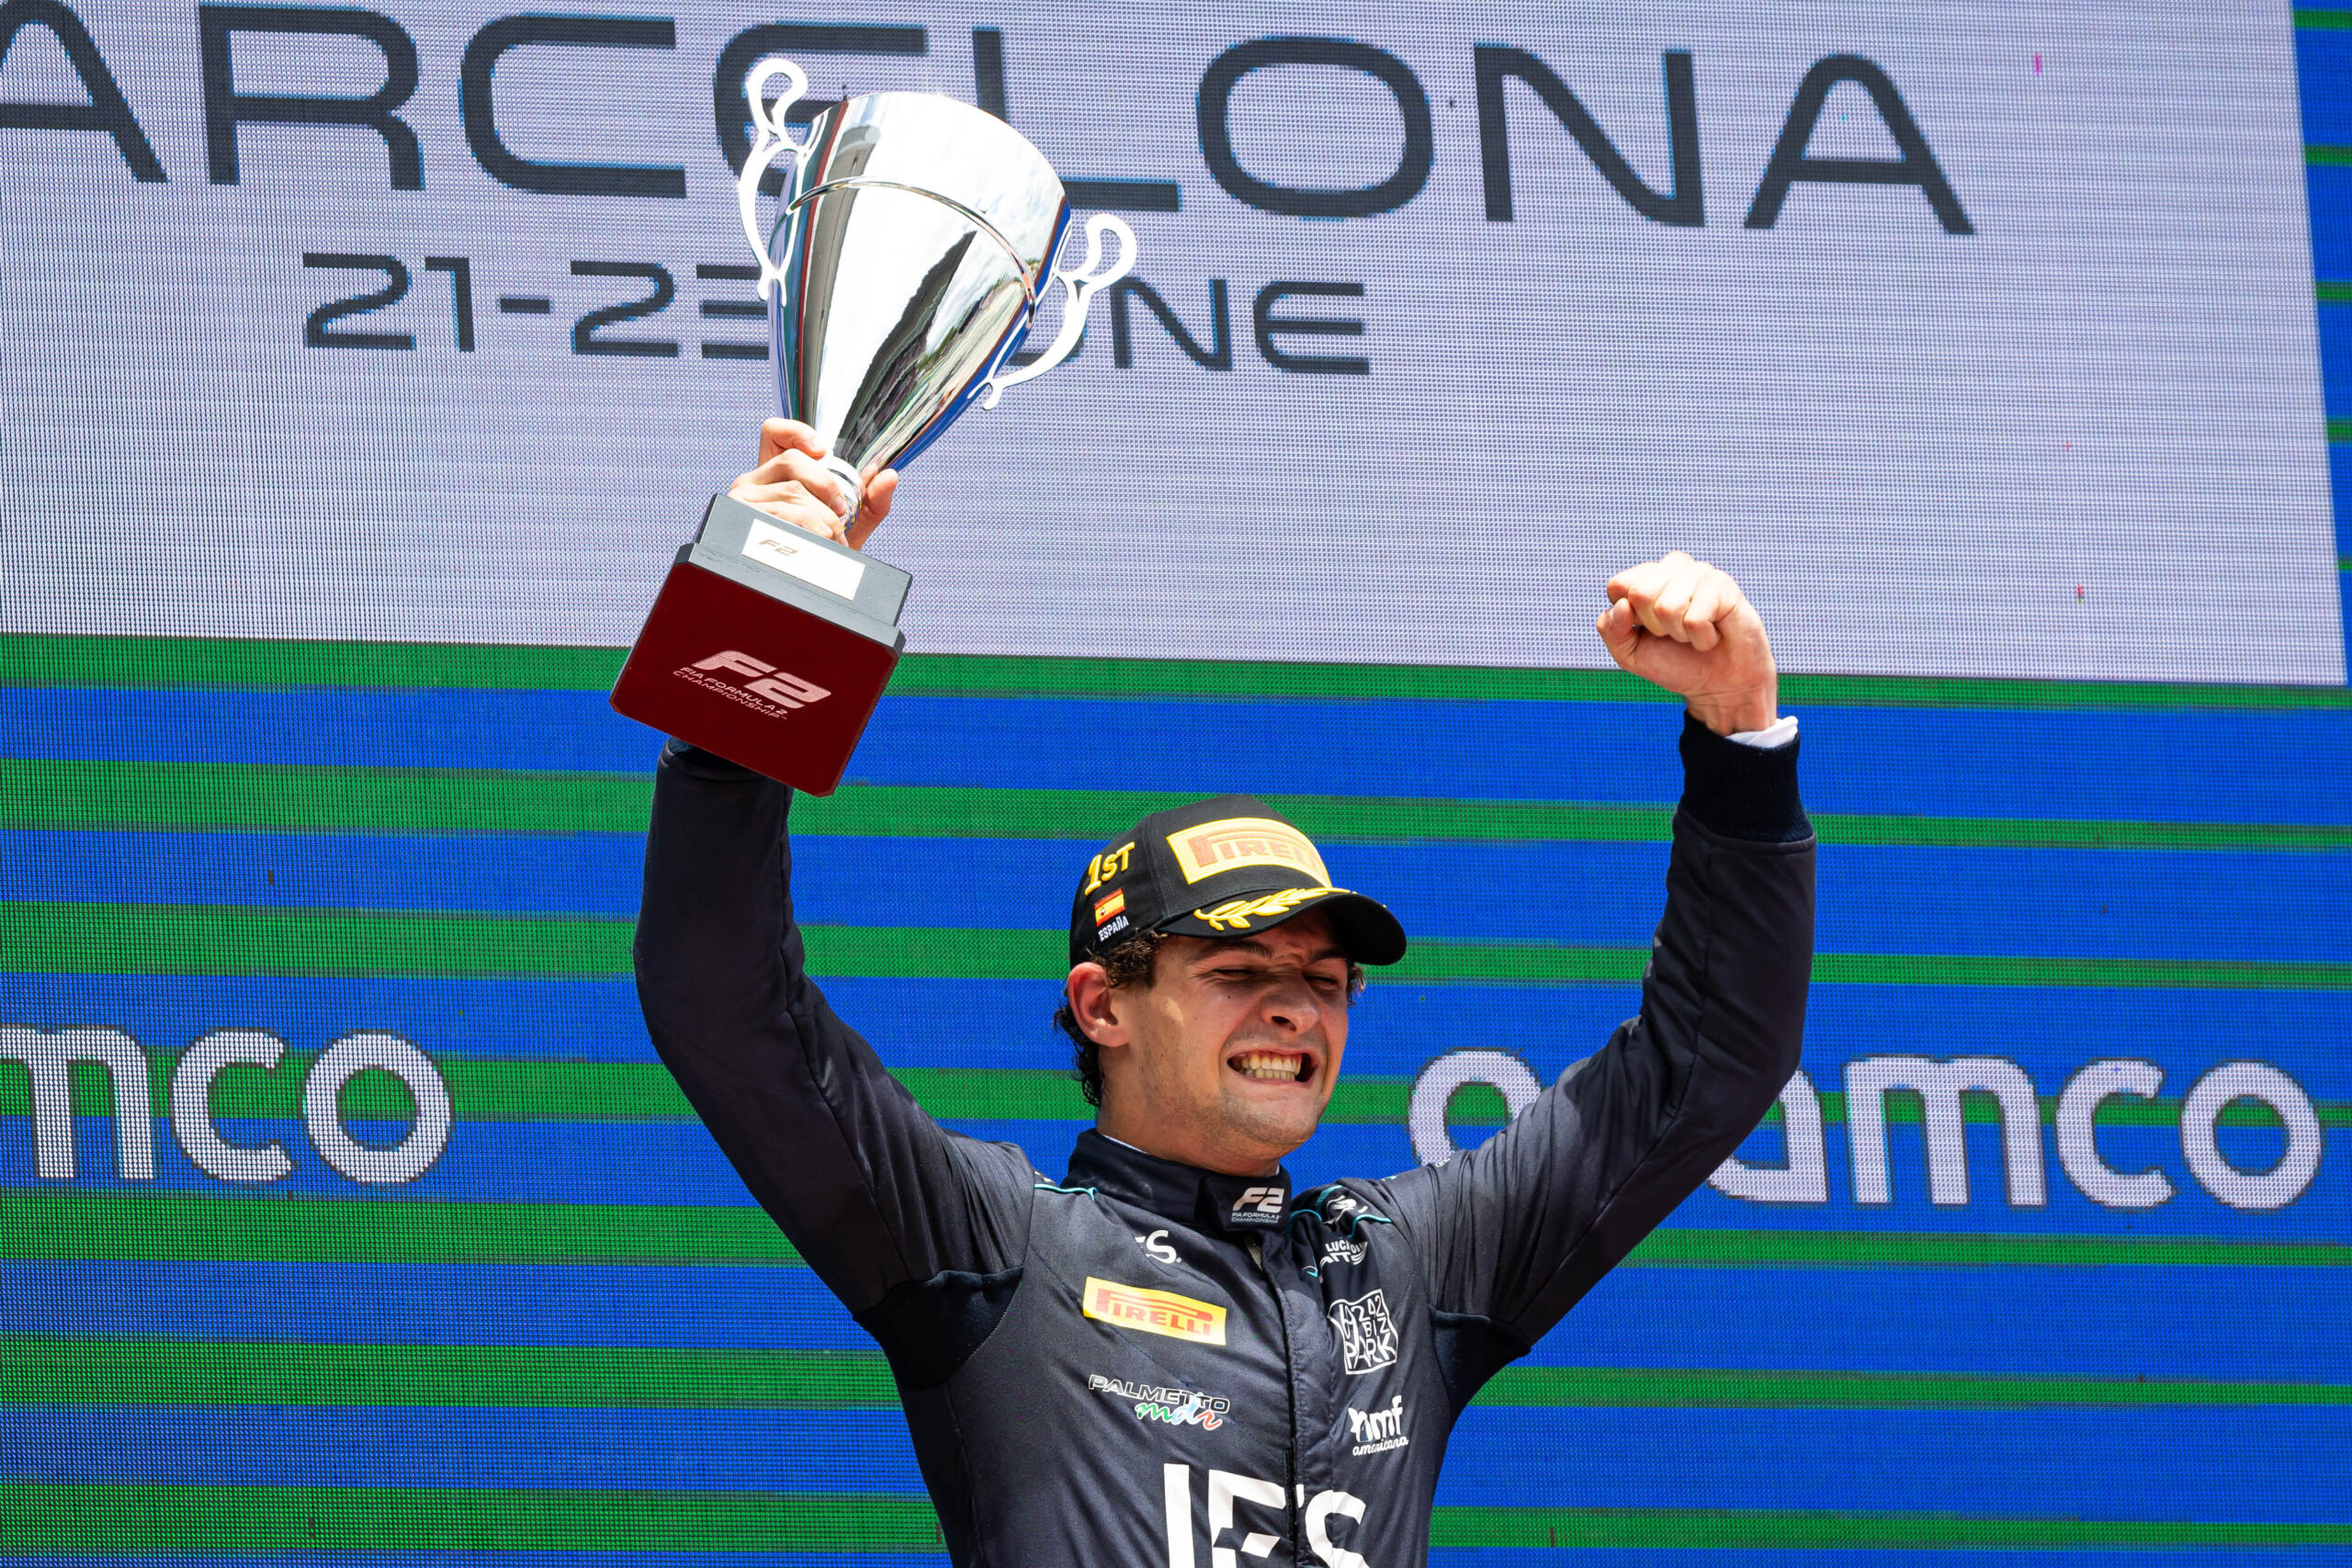 Crawford Takes Dominant F2 Feature Race victory at Barcelona